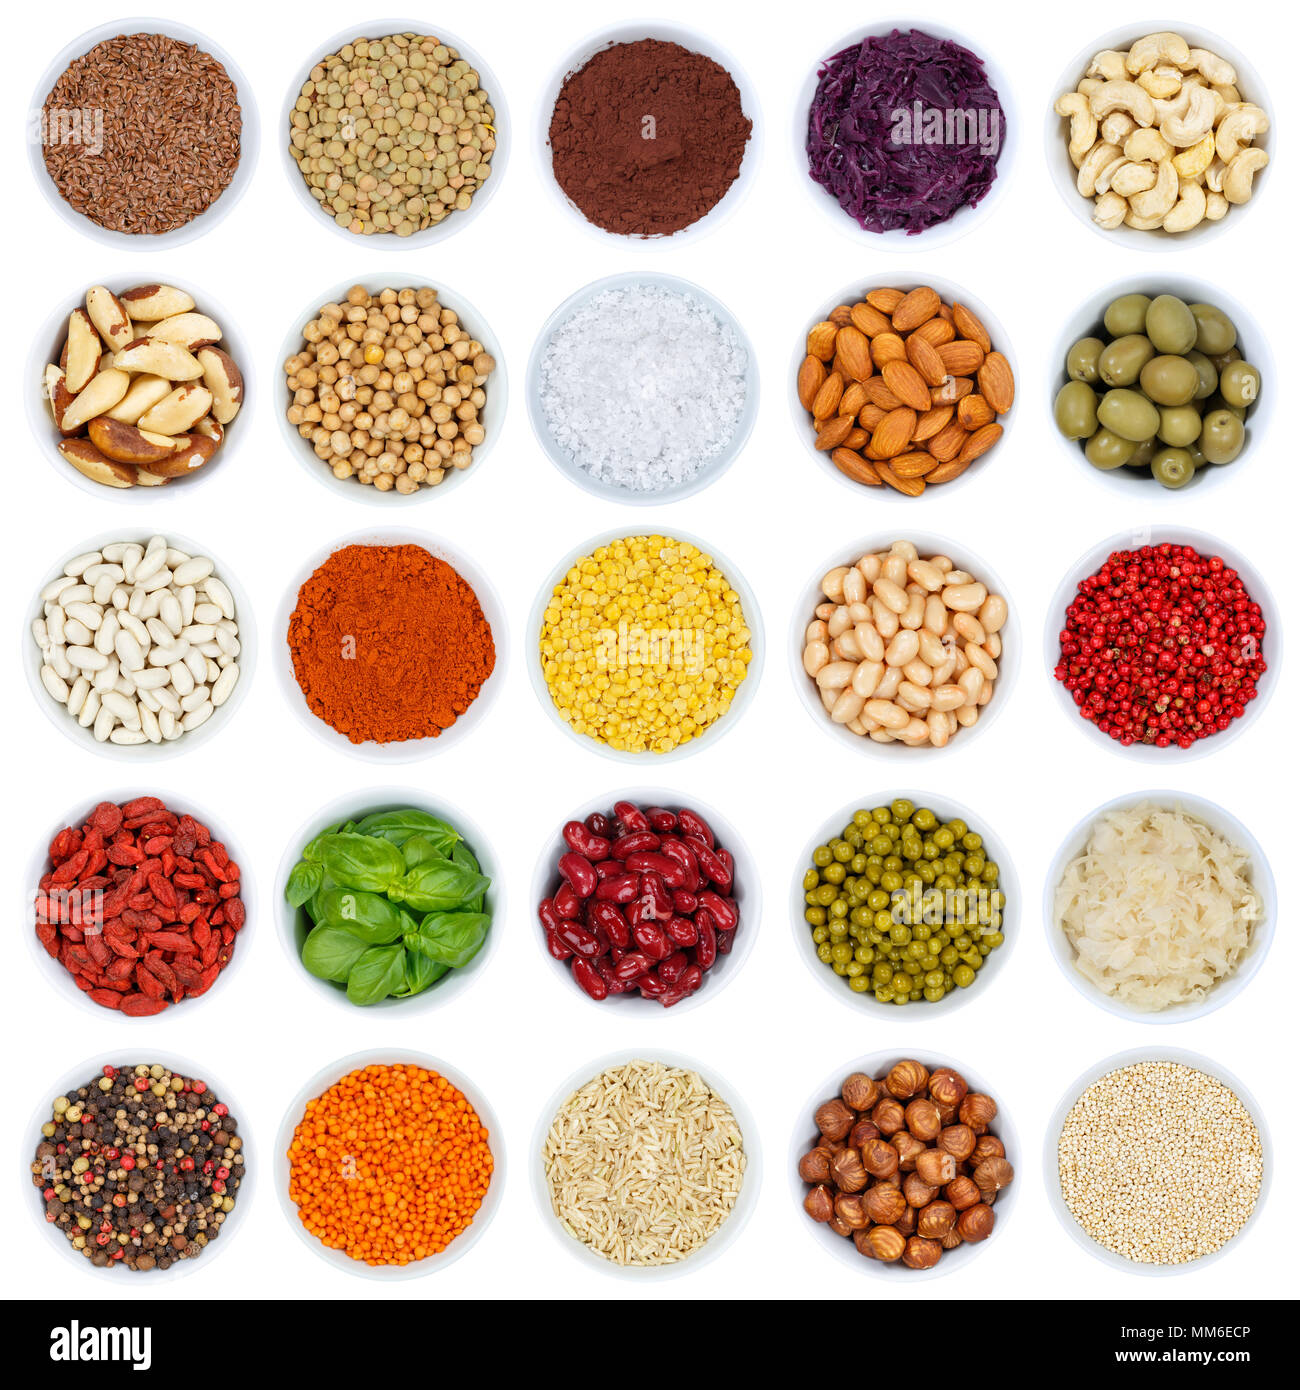 Collection of spices and herbs vegetables nuts square from above bowl isolated on a white background Stock Photo